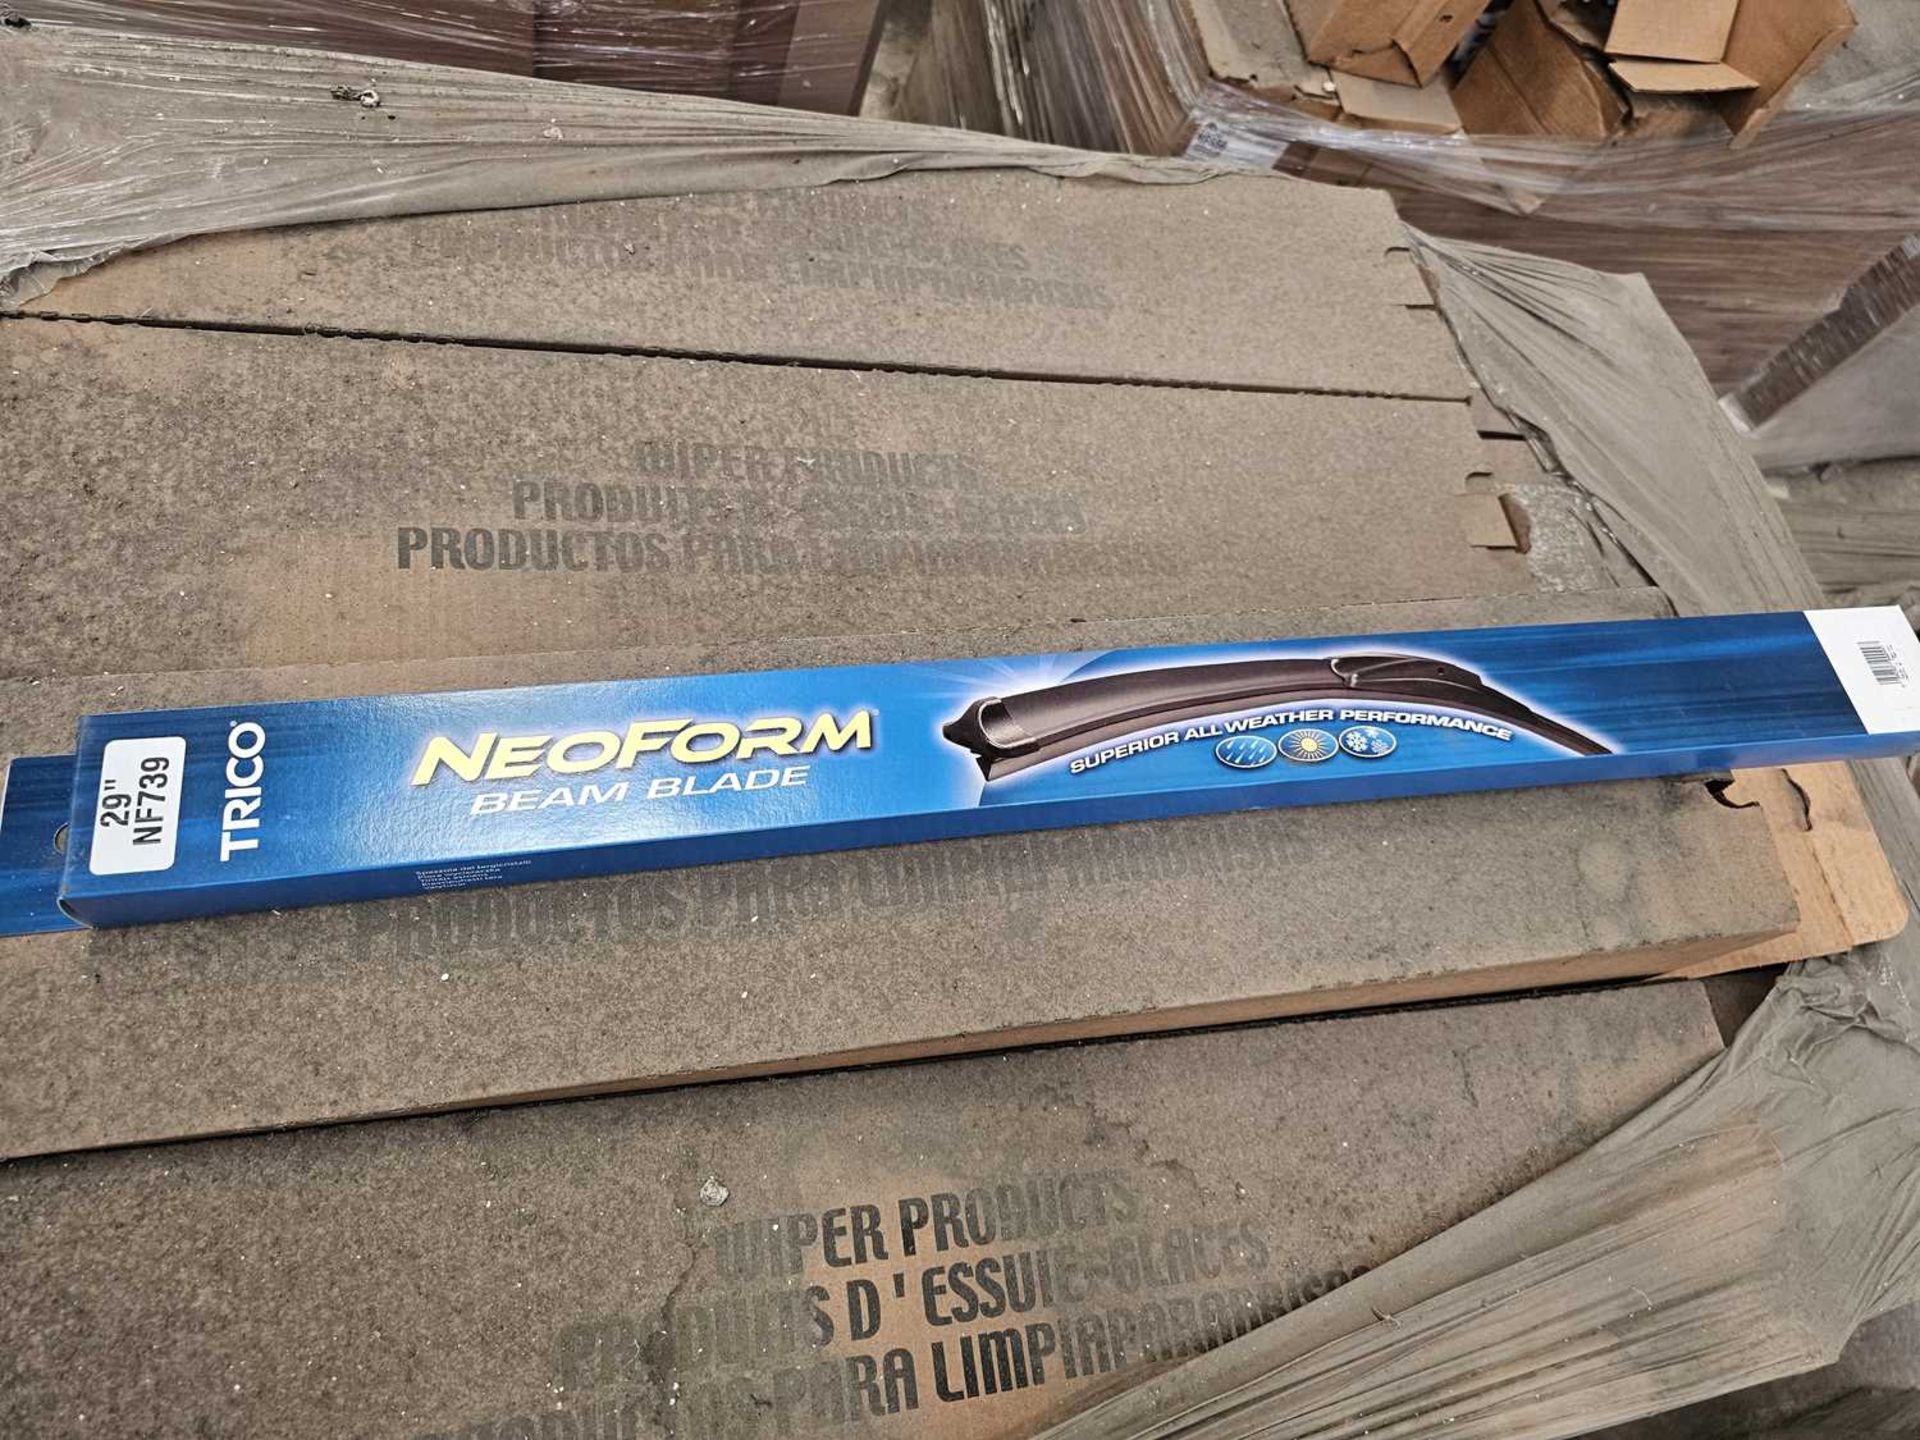 Unused Pallet of Trico NF739 Windscreen Wipers (29")